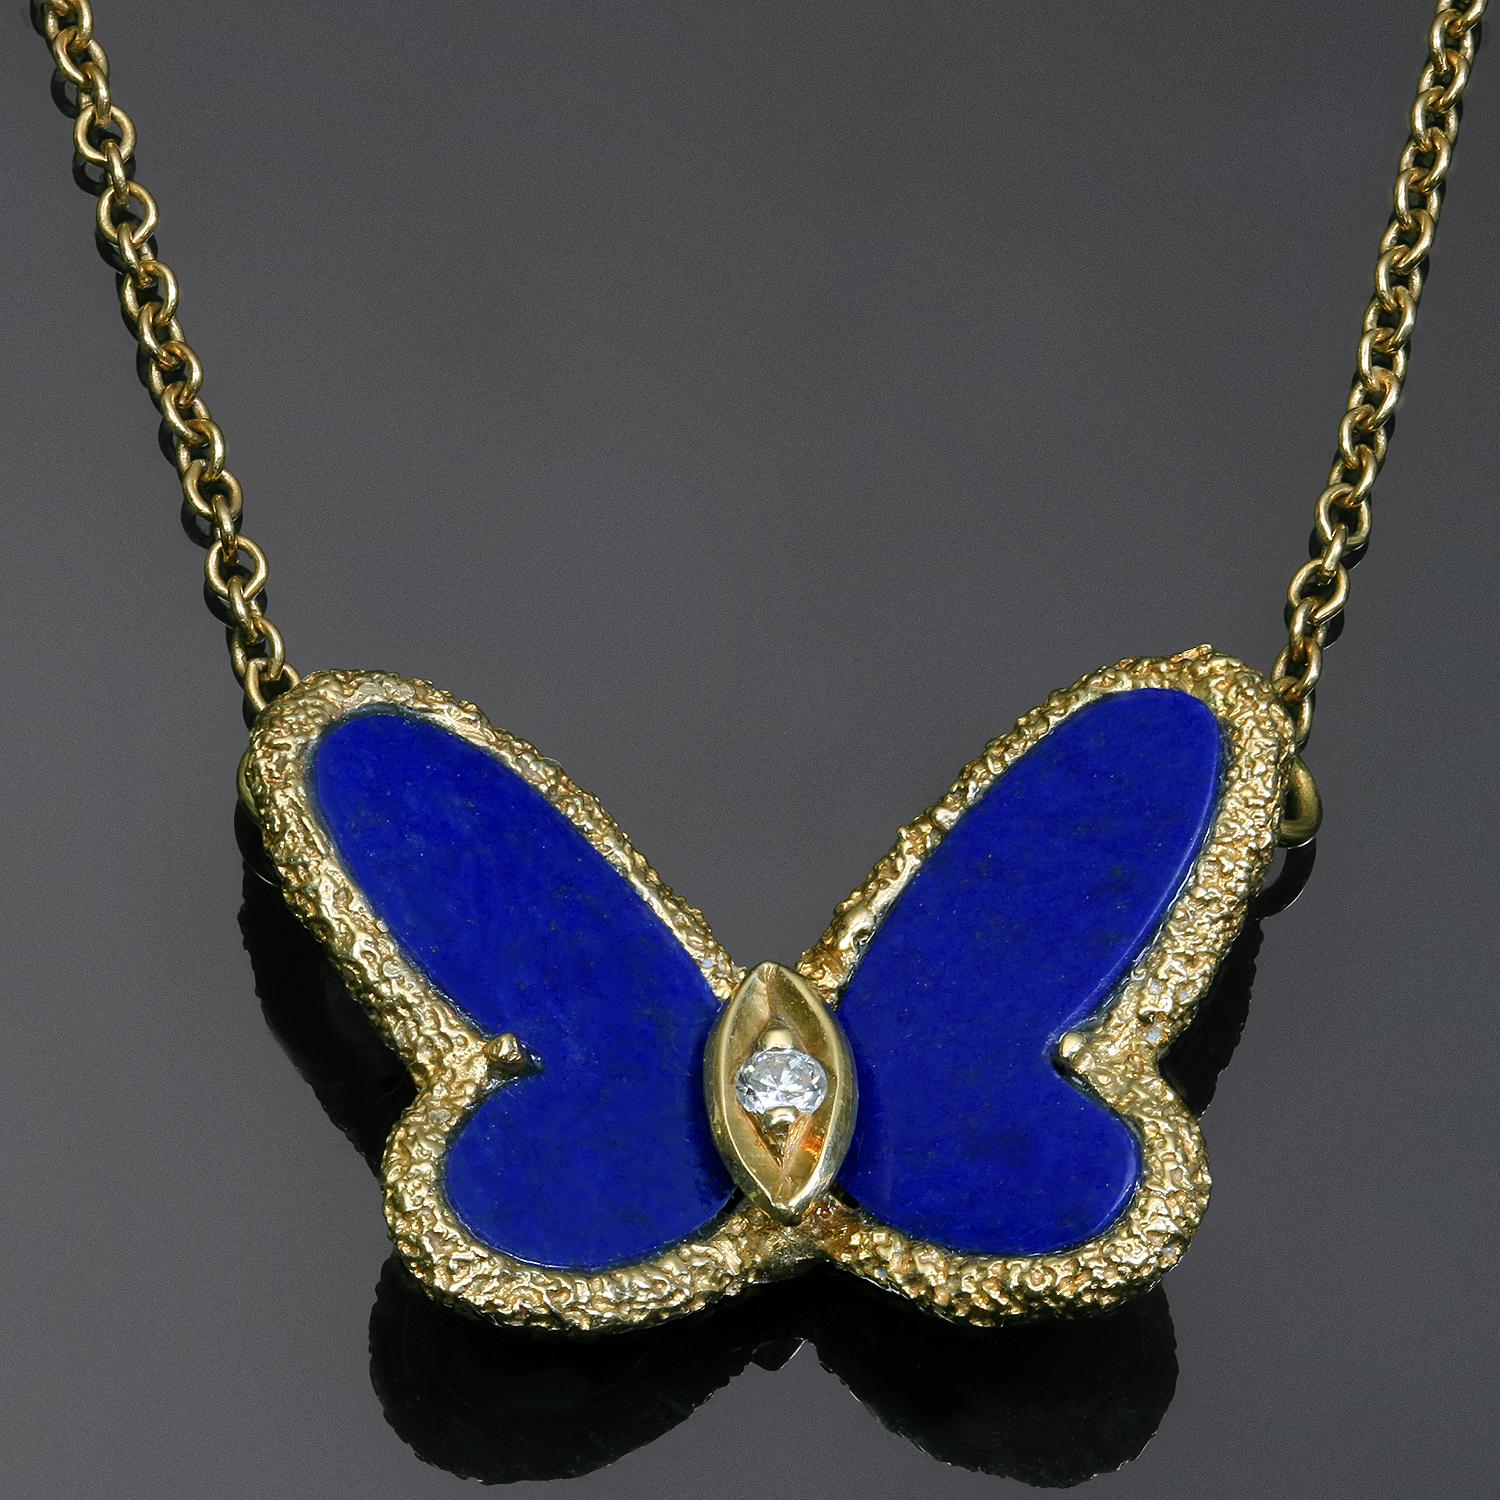 This iconic Van Cleef & Arpels necklace is crafted in 18k yellow gold and features a butterfly shaped pendant suspended from a link chain and accented with blue lapis lazuli wings and a brilliant-cut round diamond of an estimated 0.03 carats. Made